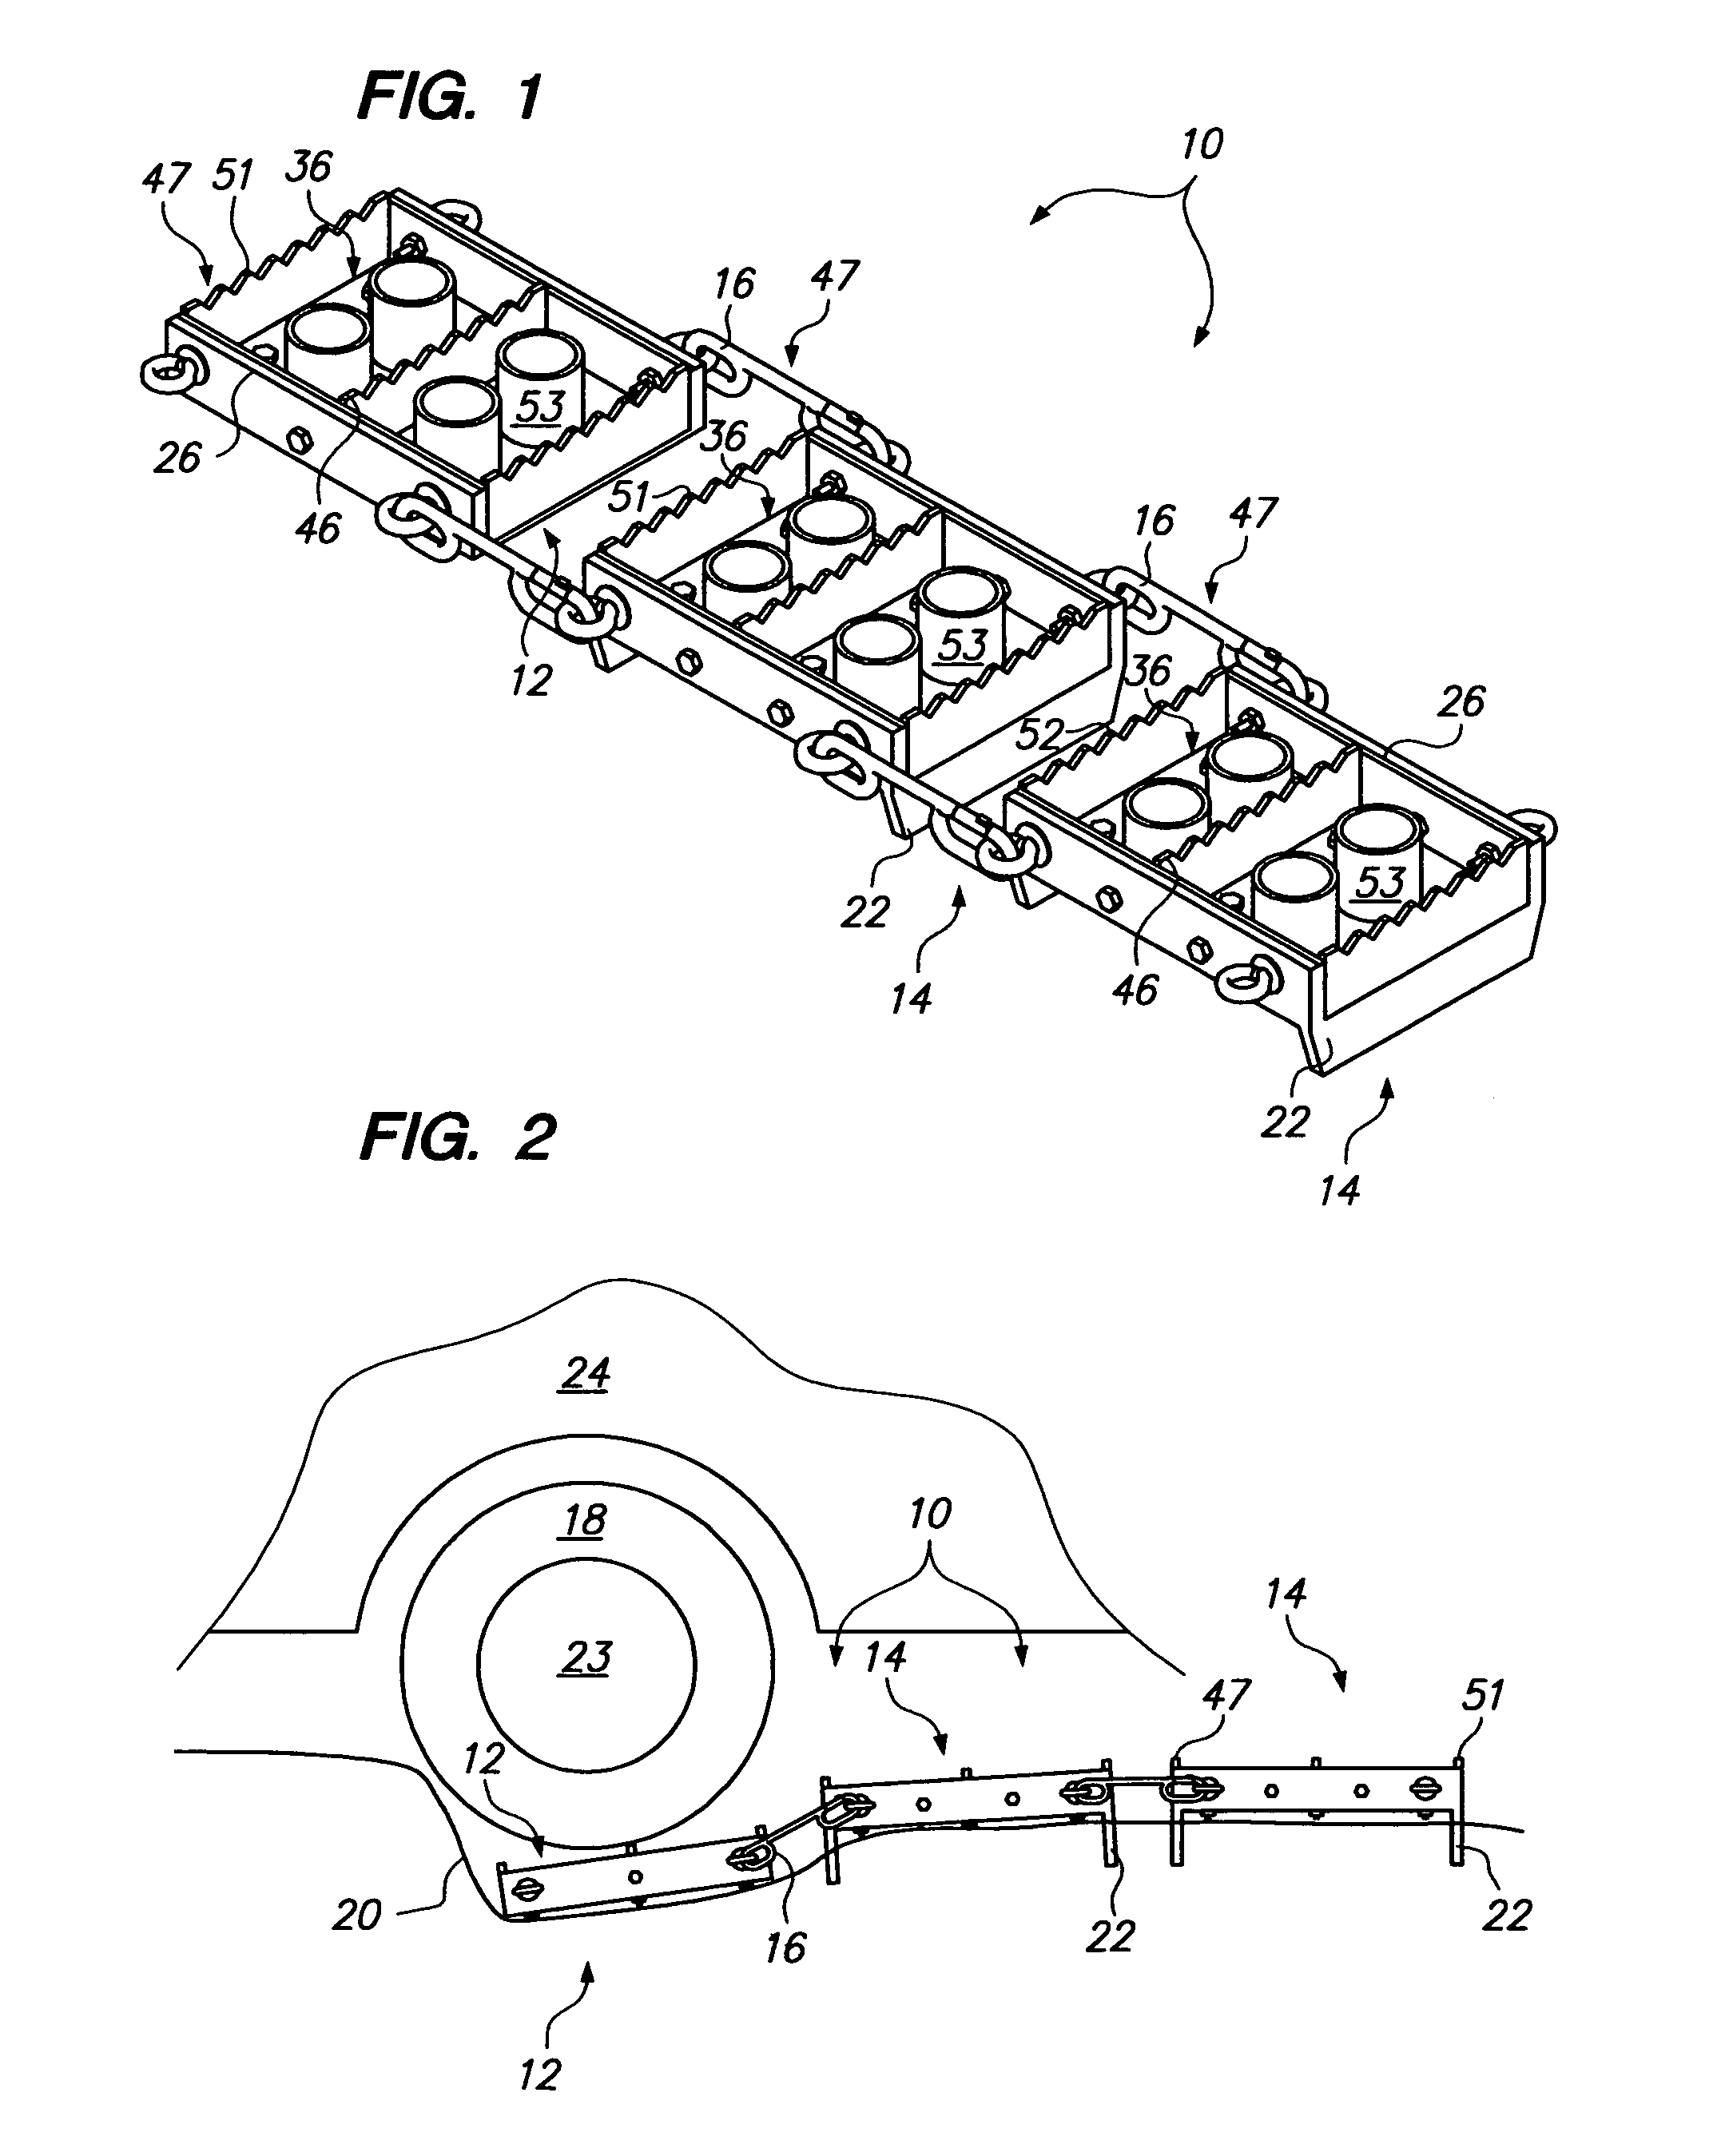 Vehicle traction device